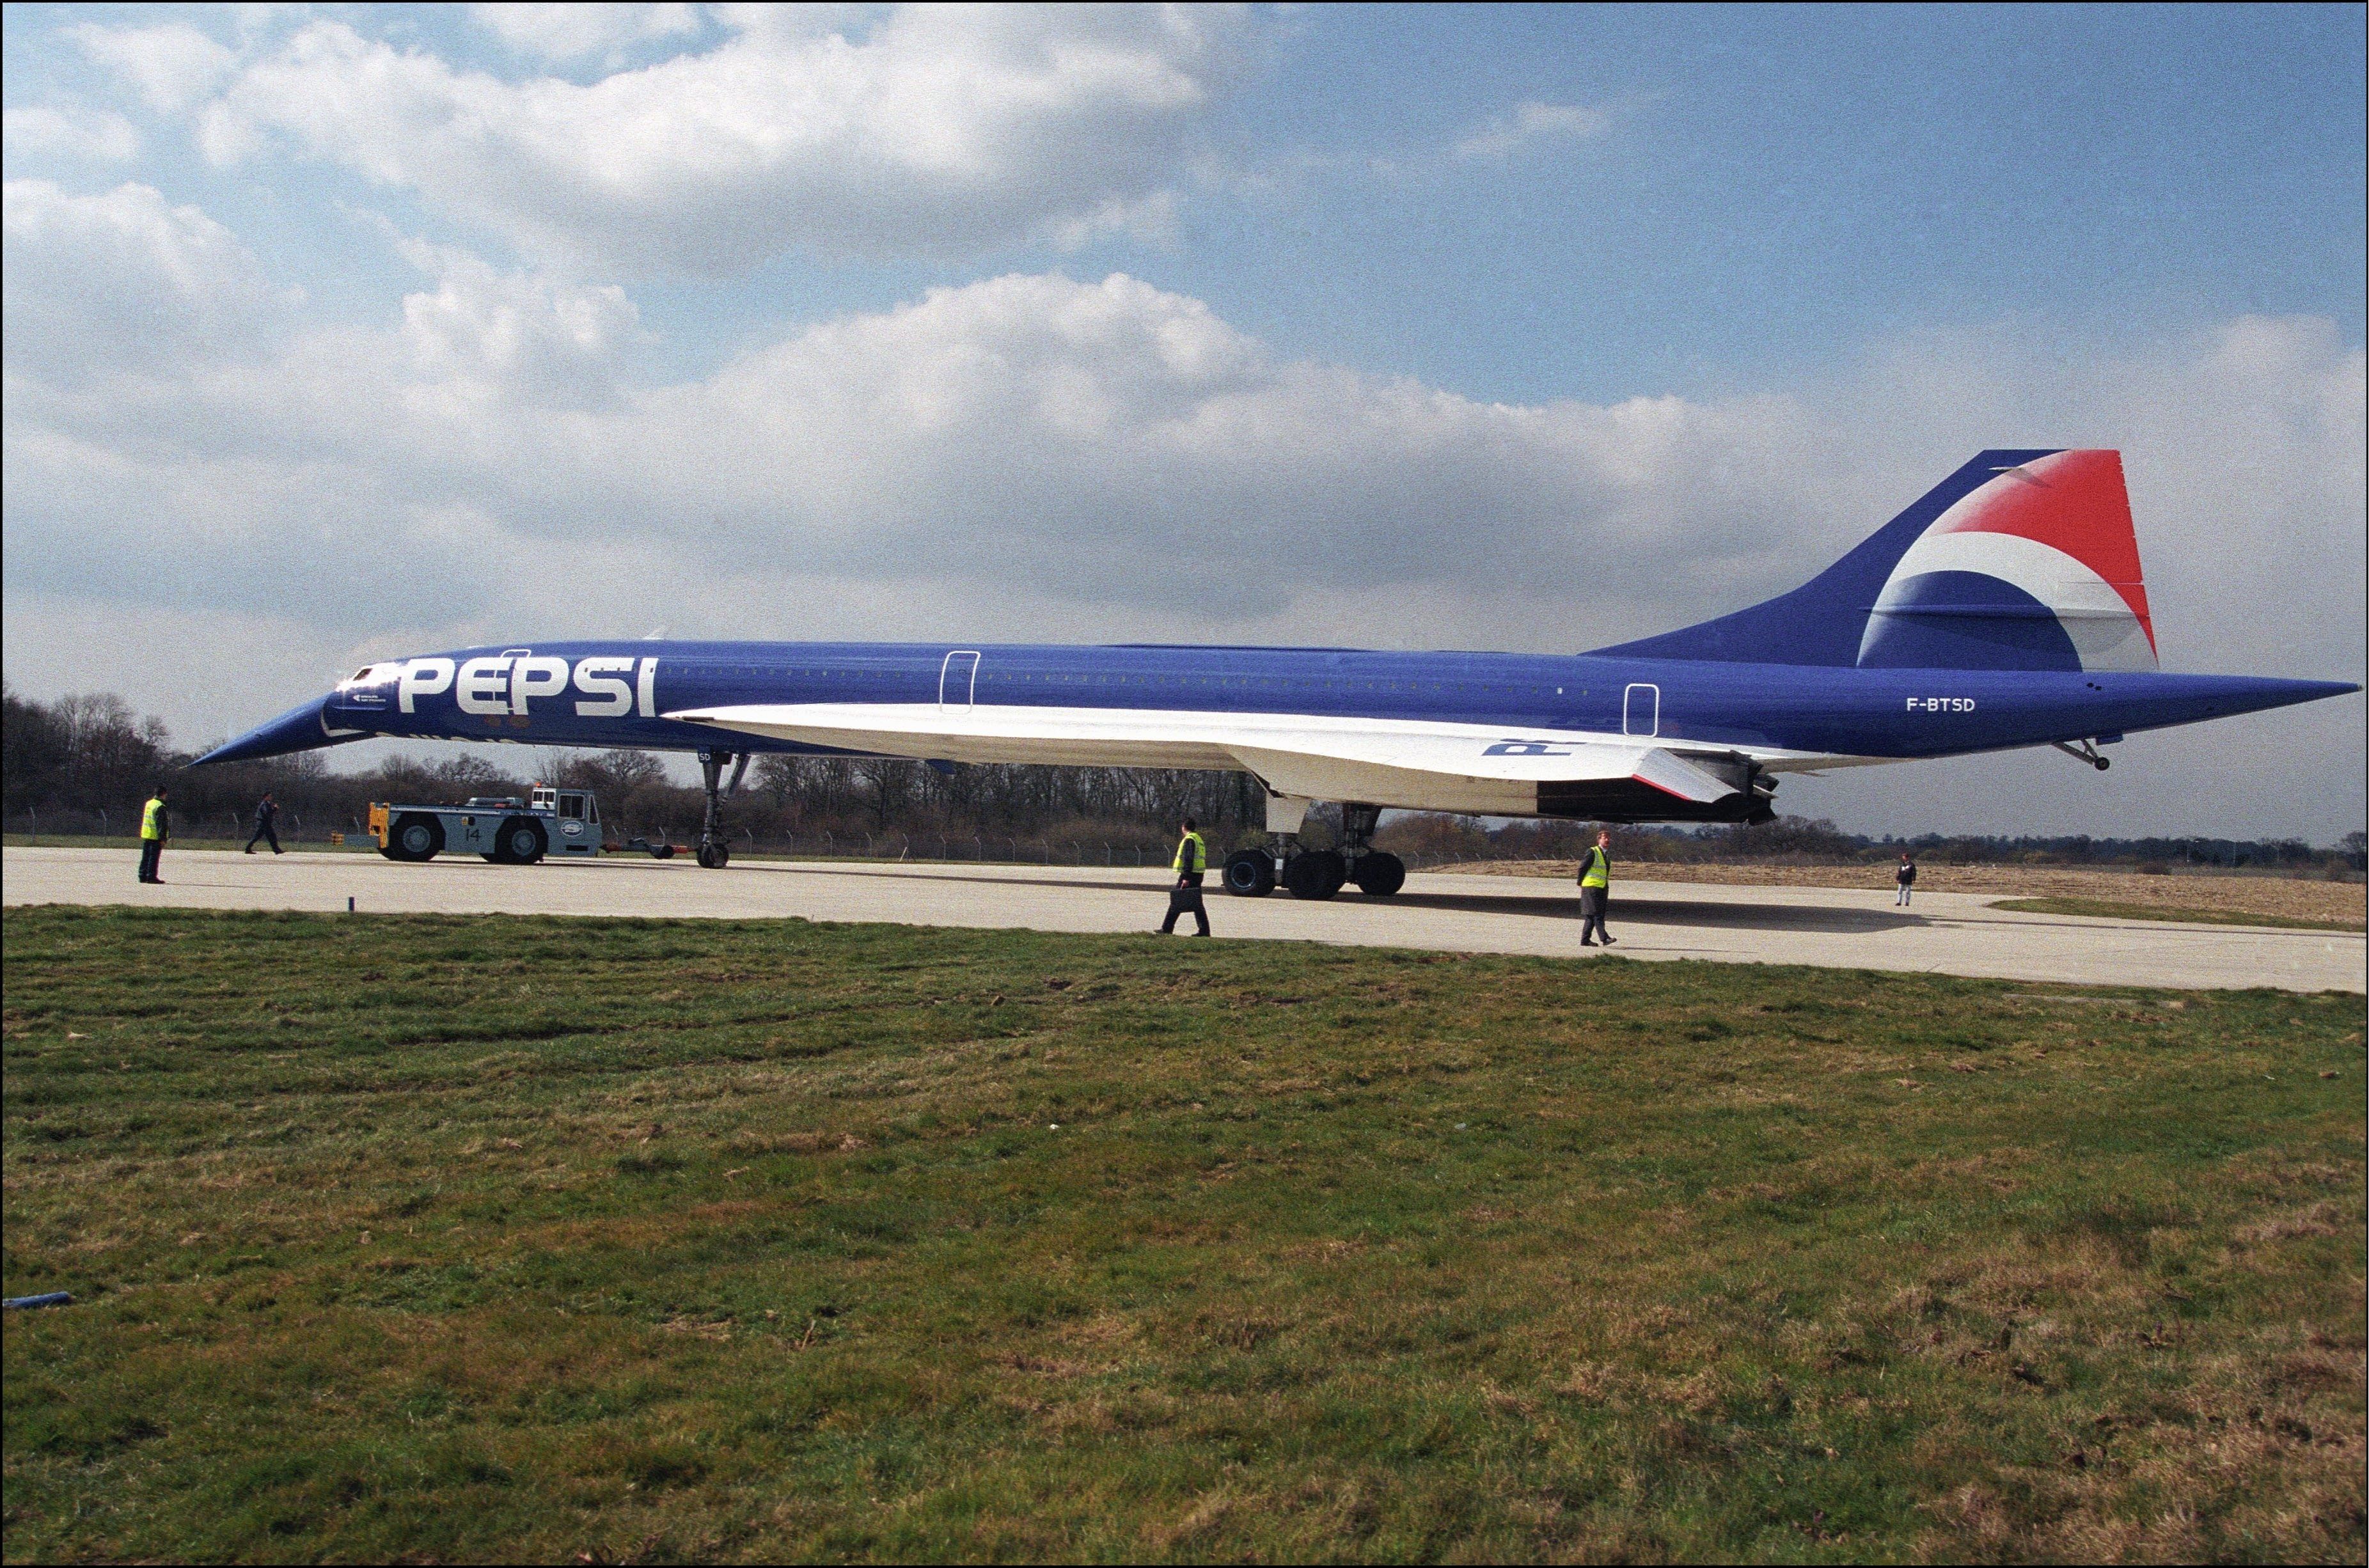 Why Was A Concorde Painted In A Pepsi Livery?